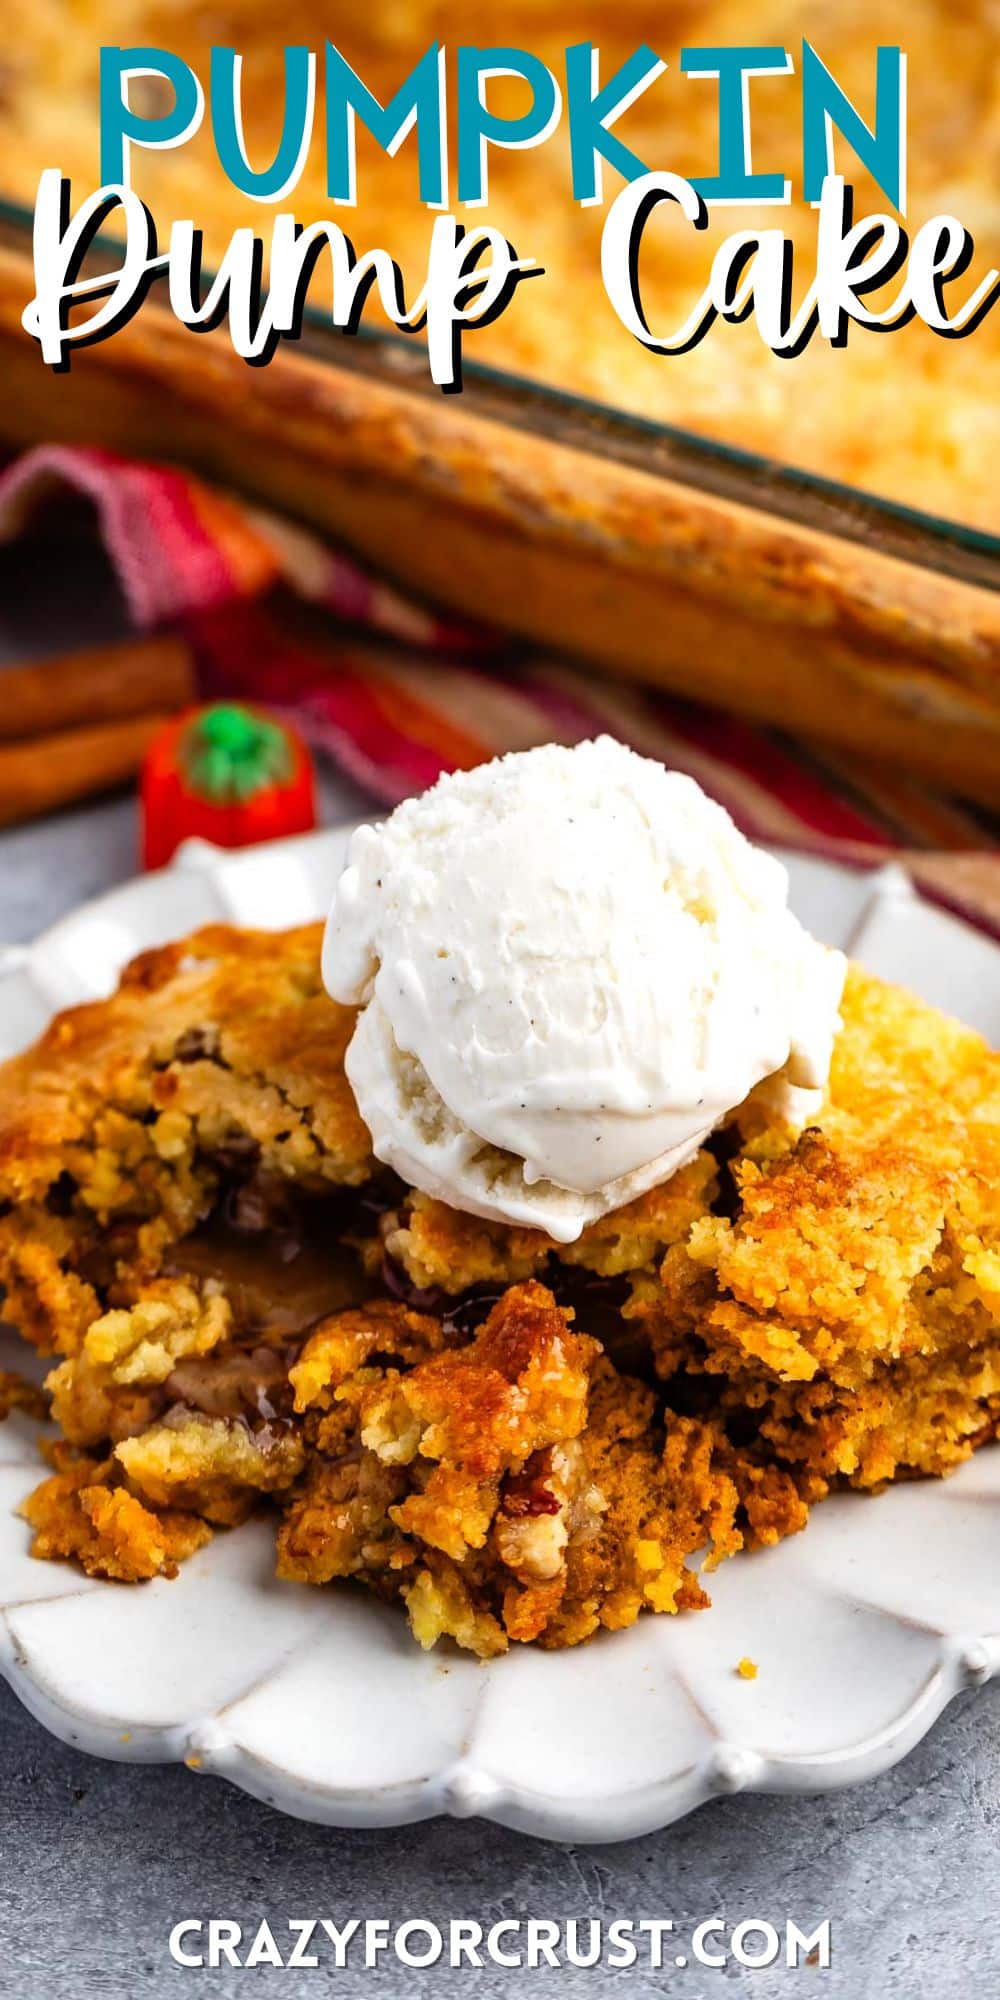 dump cake on a grey plate with ice cream scoop on top with words on the image.